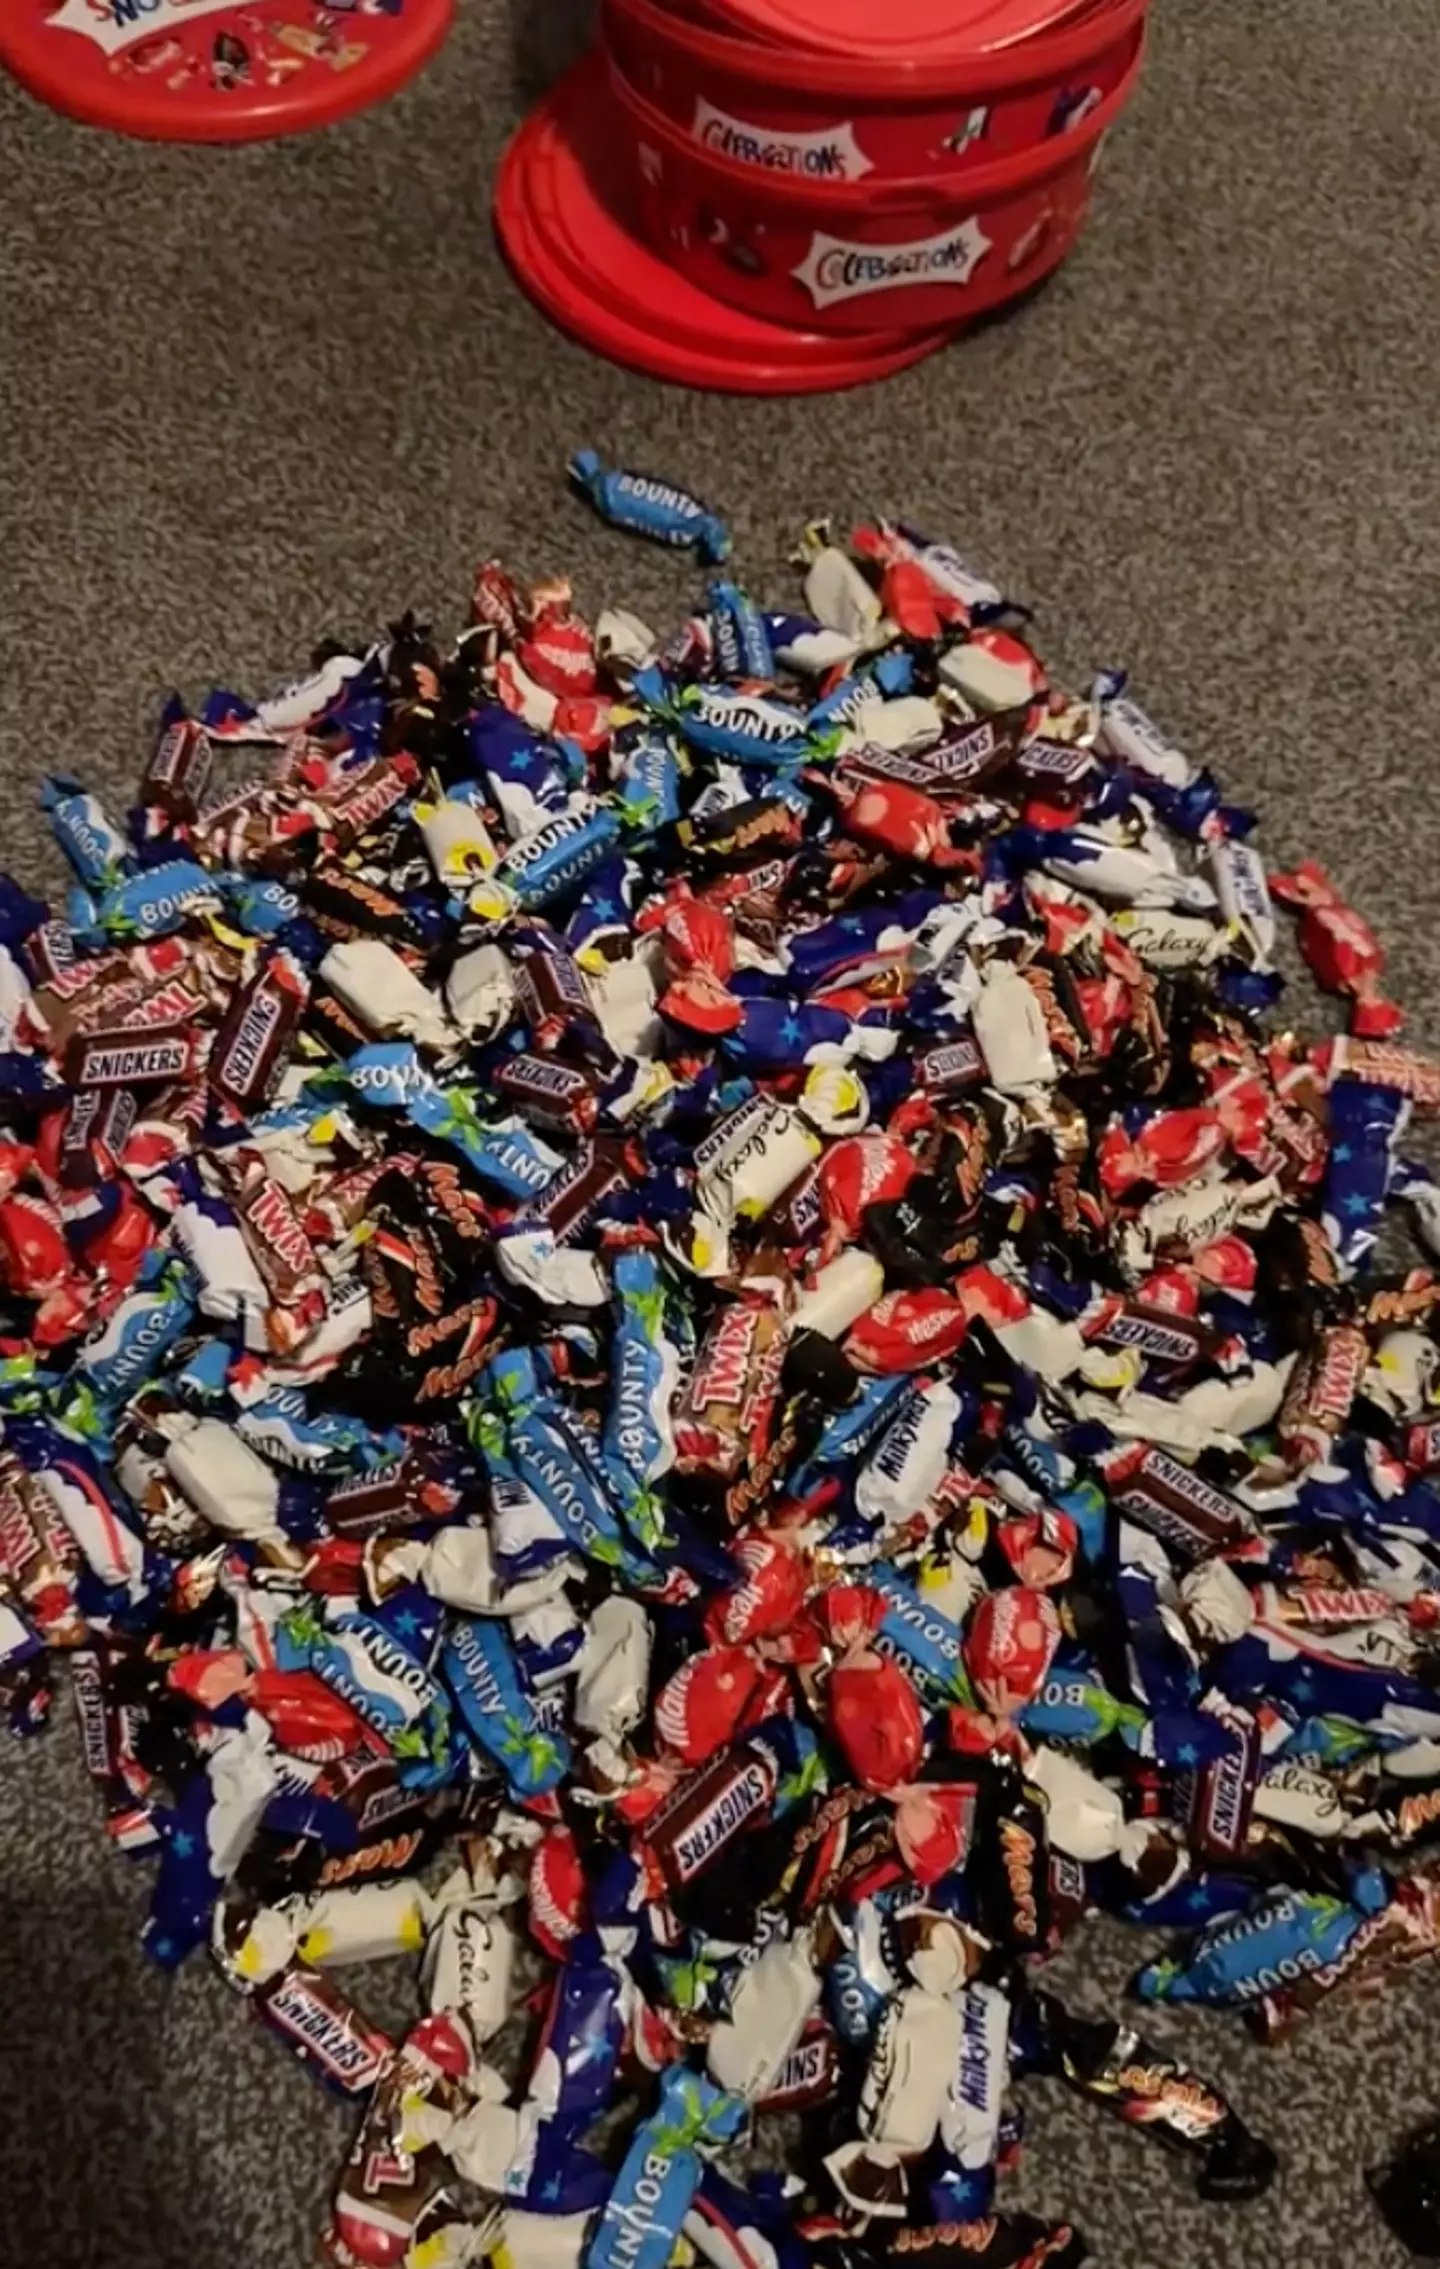 The TikToker poured all the treats into a pile before sorting them.